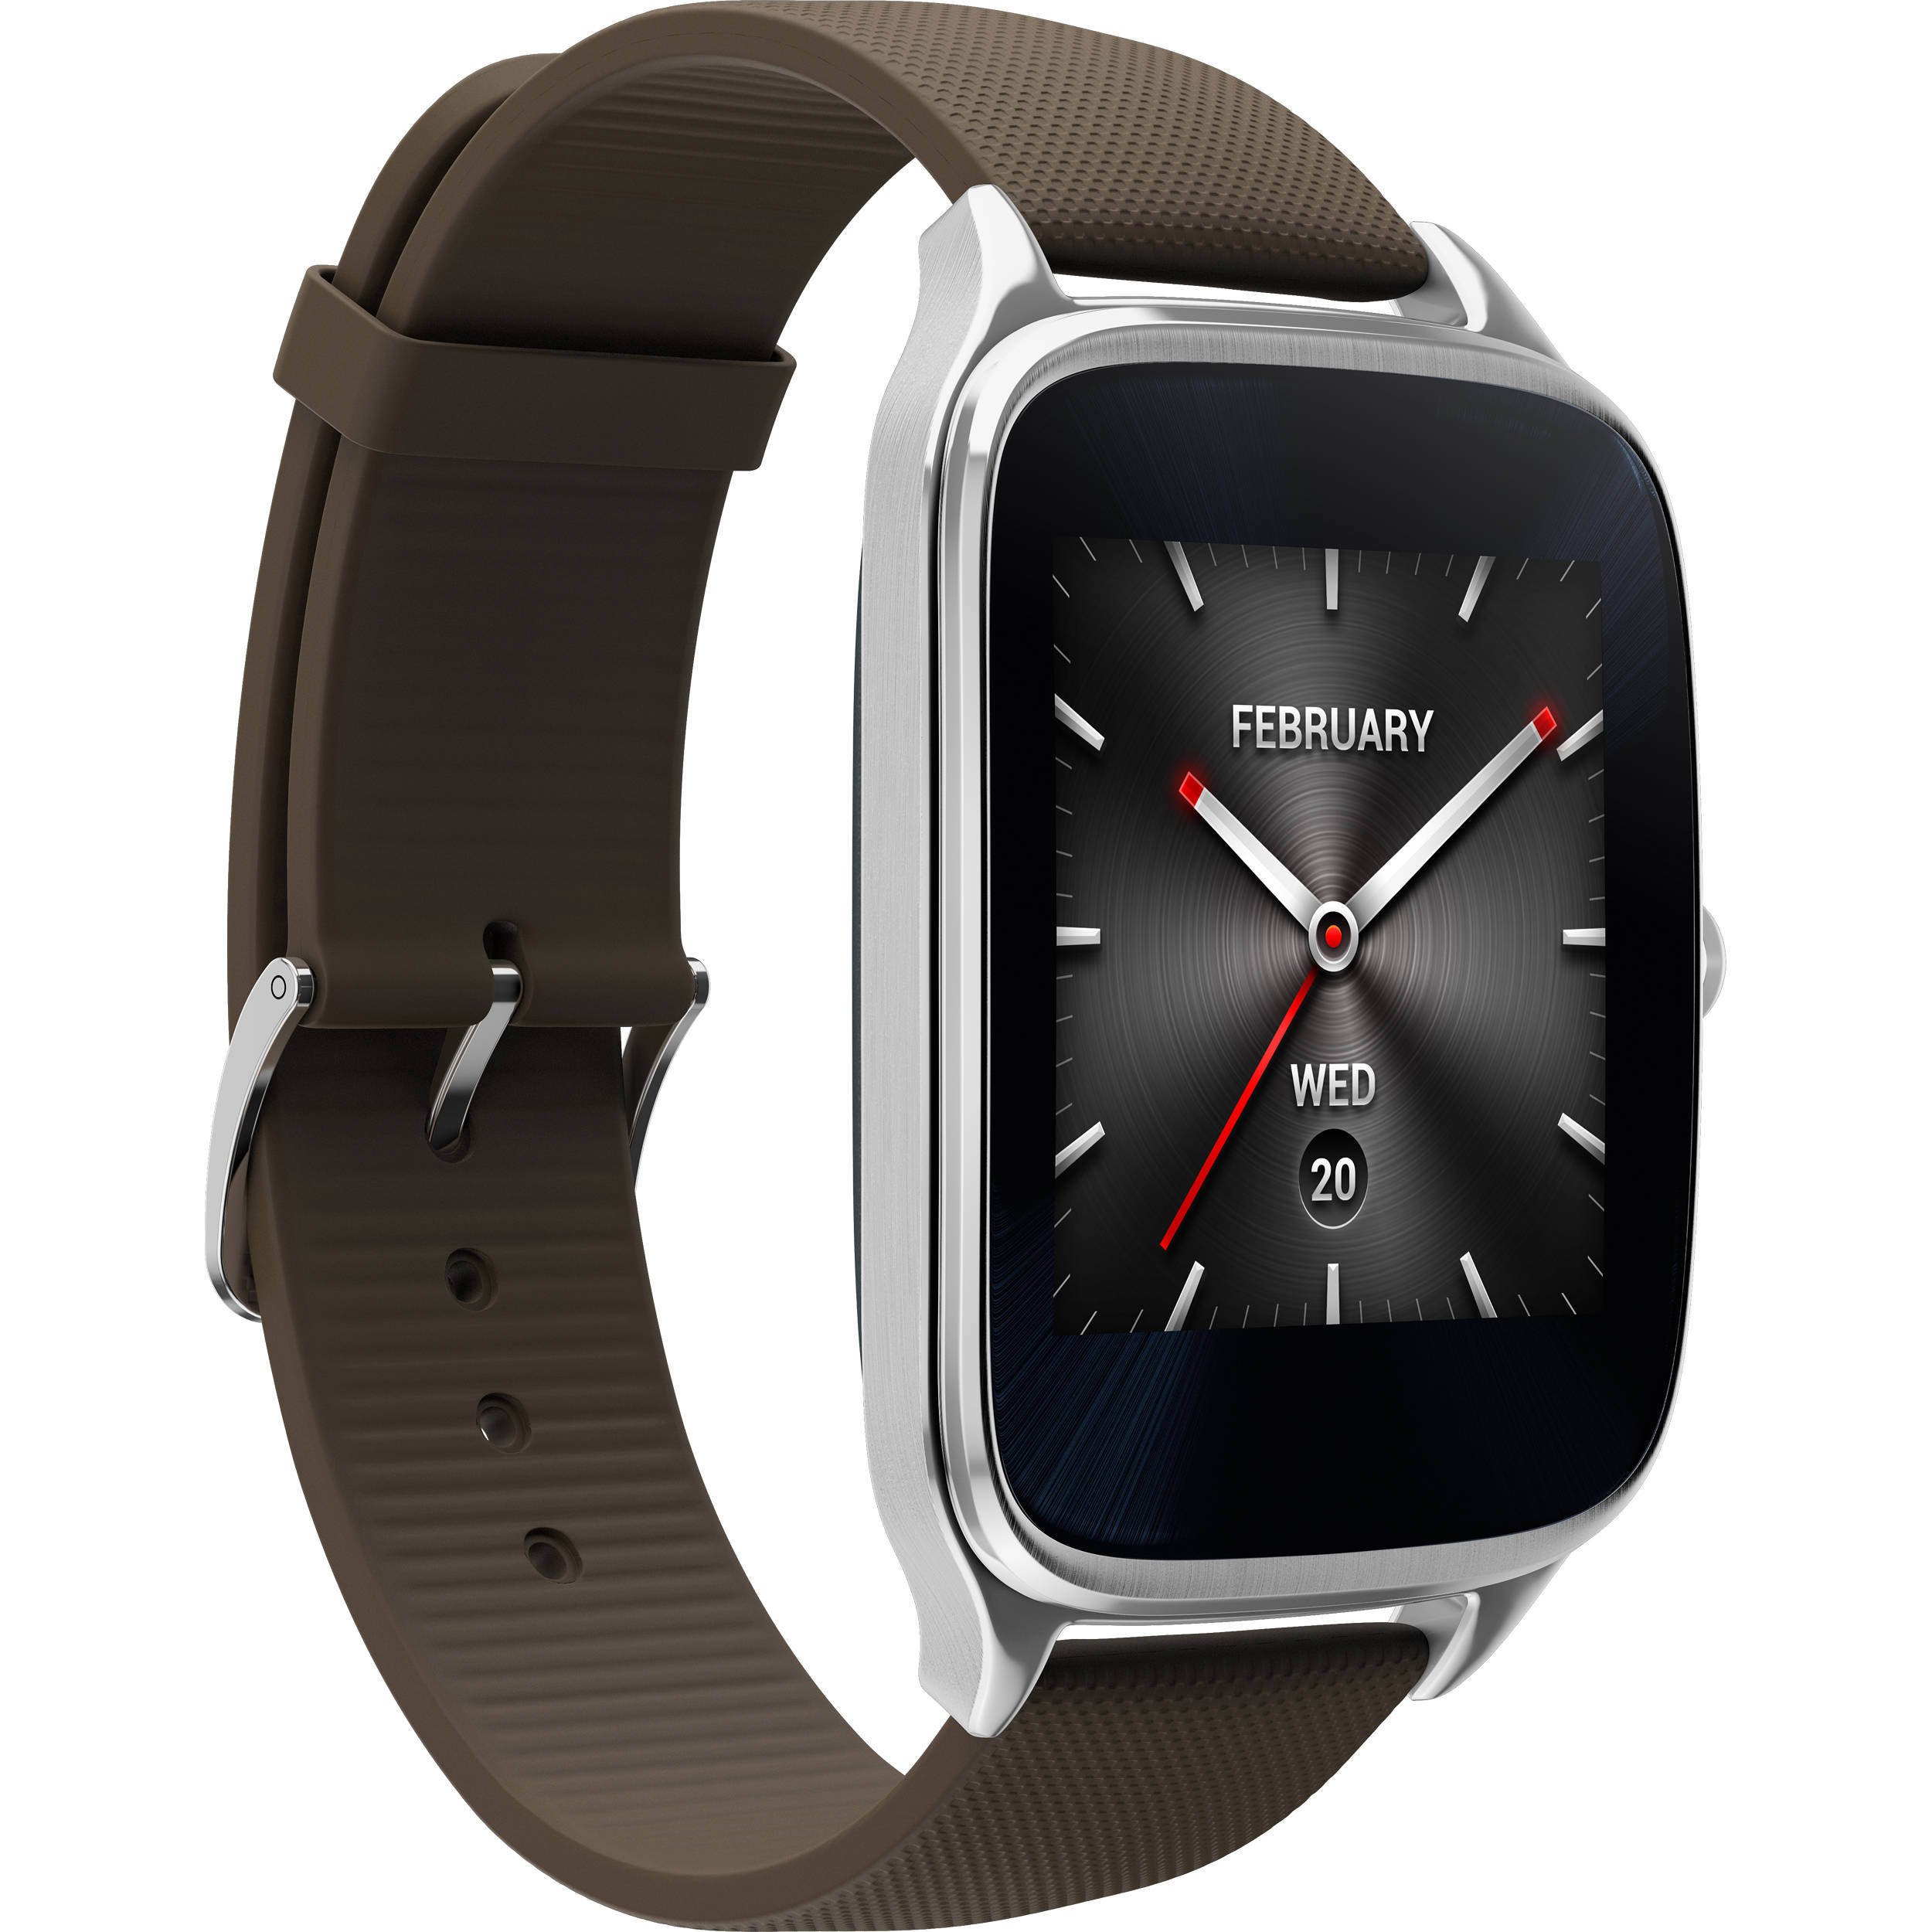 ASUS ZenWatch 2 Android Wear Smartwatch 